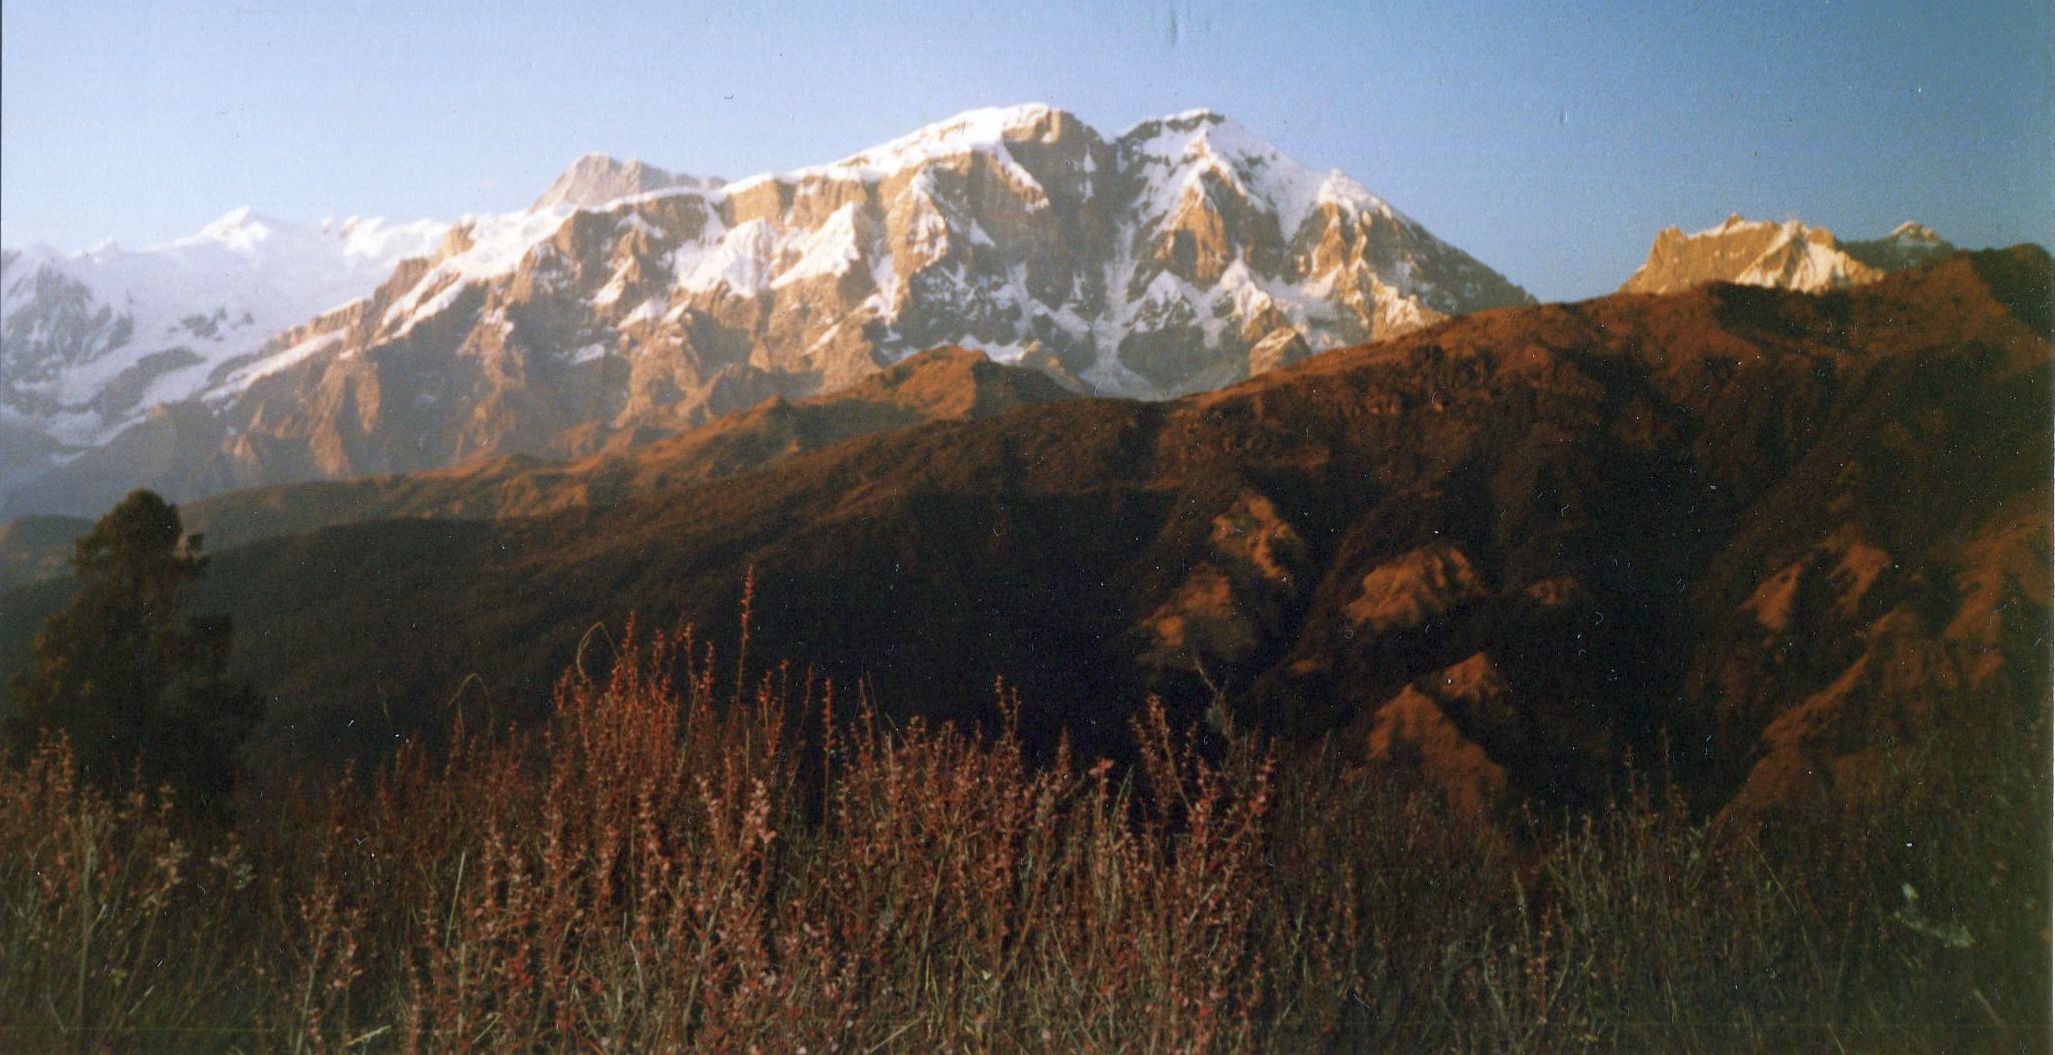 Sunset on the Annapurna Himal and the Lamjung Himal